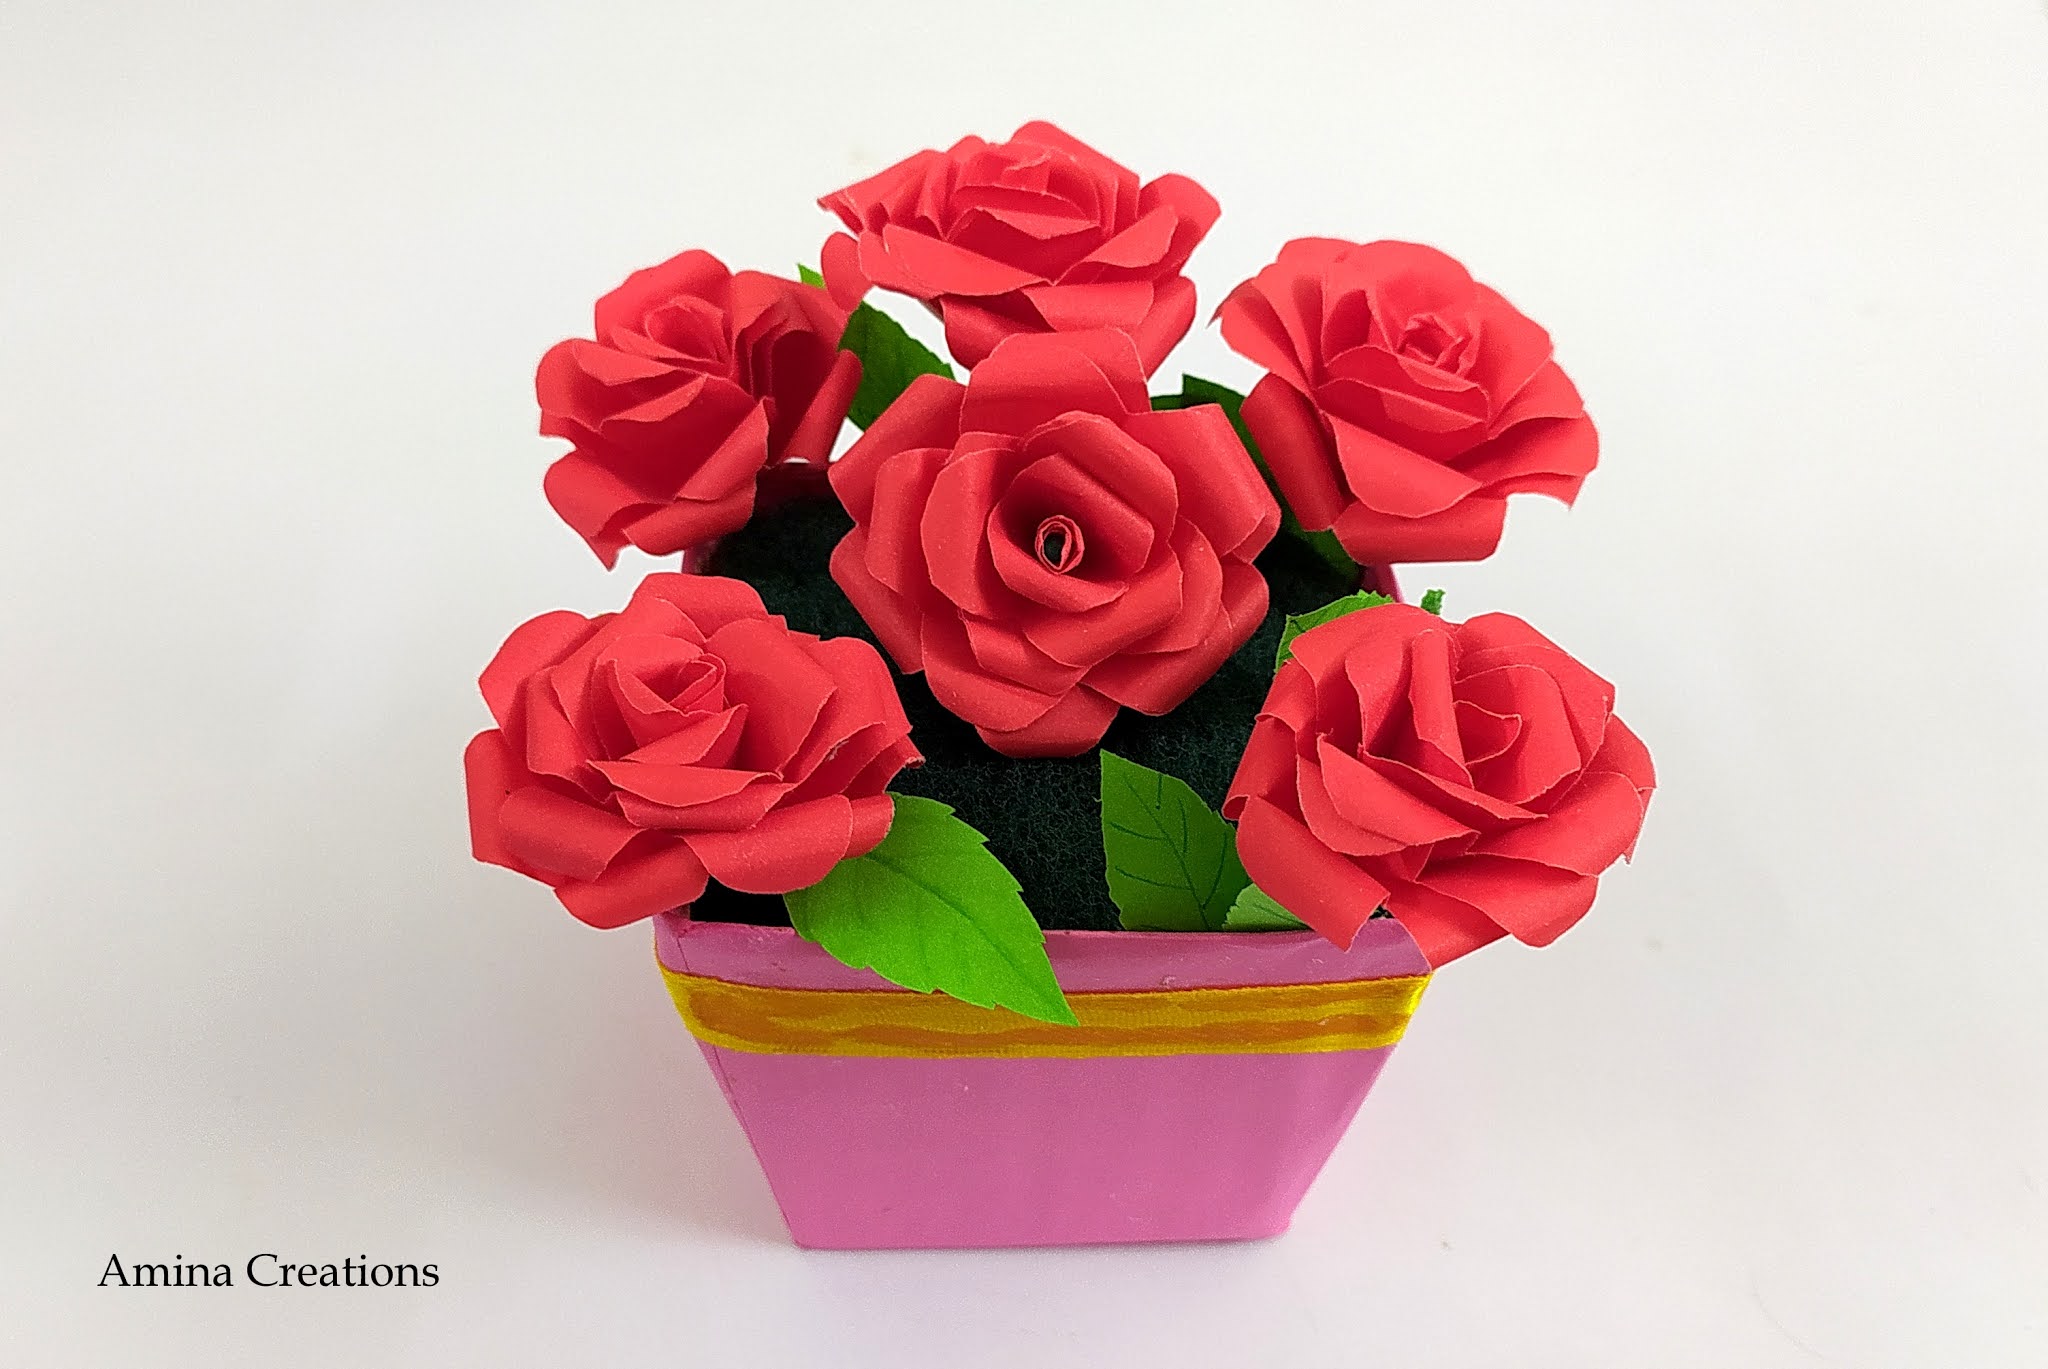 AMINA CREATIONS: DIY PAPER ROSE/ HOW TO MAKE EASY ROSE FLOWER FROM